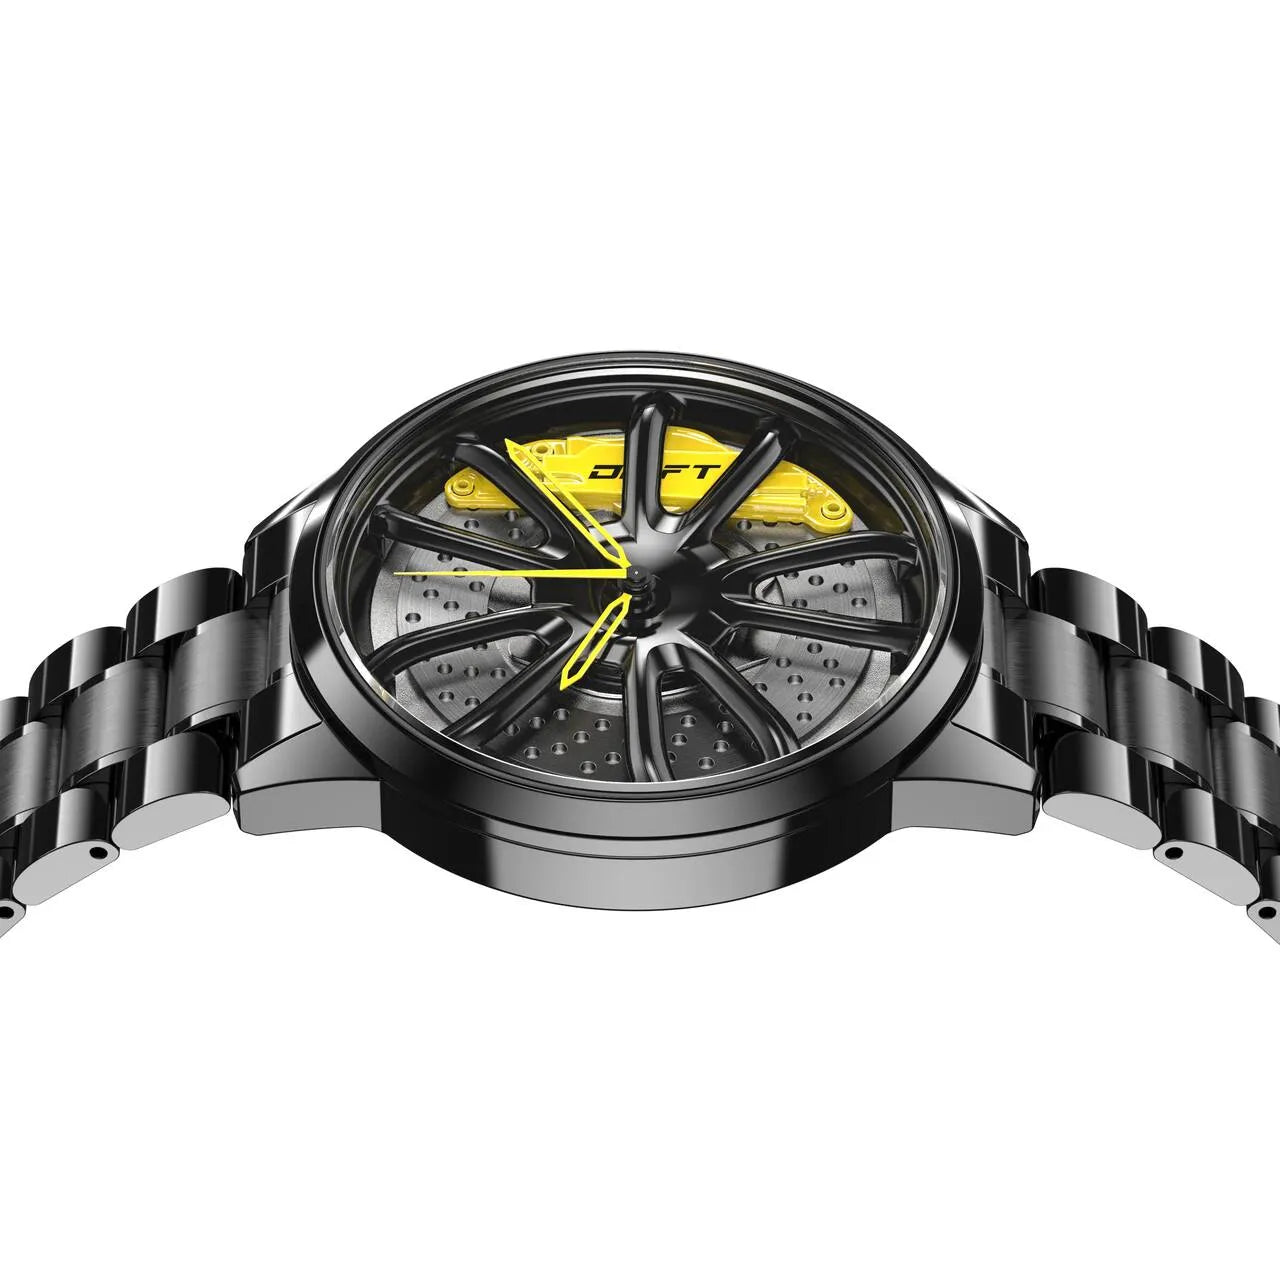 Rev up your auto style with our captivating yellow Performance GT Rim Watch! Crafted by a German startup, these precision watches are engineered to set the hearts of motorsport, tuning, and auto enthusiasts on fire. Get ready to spark your passion! #id_46744365433162